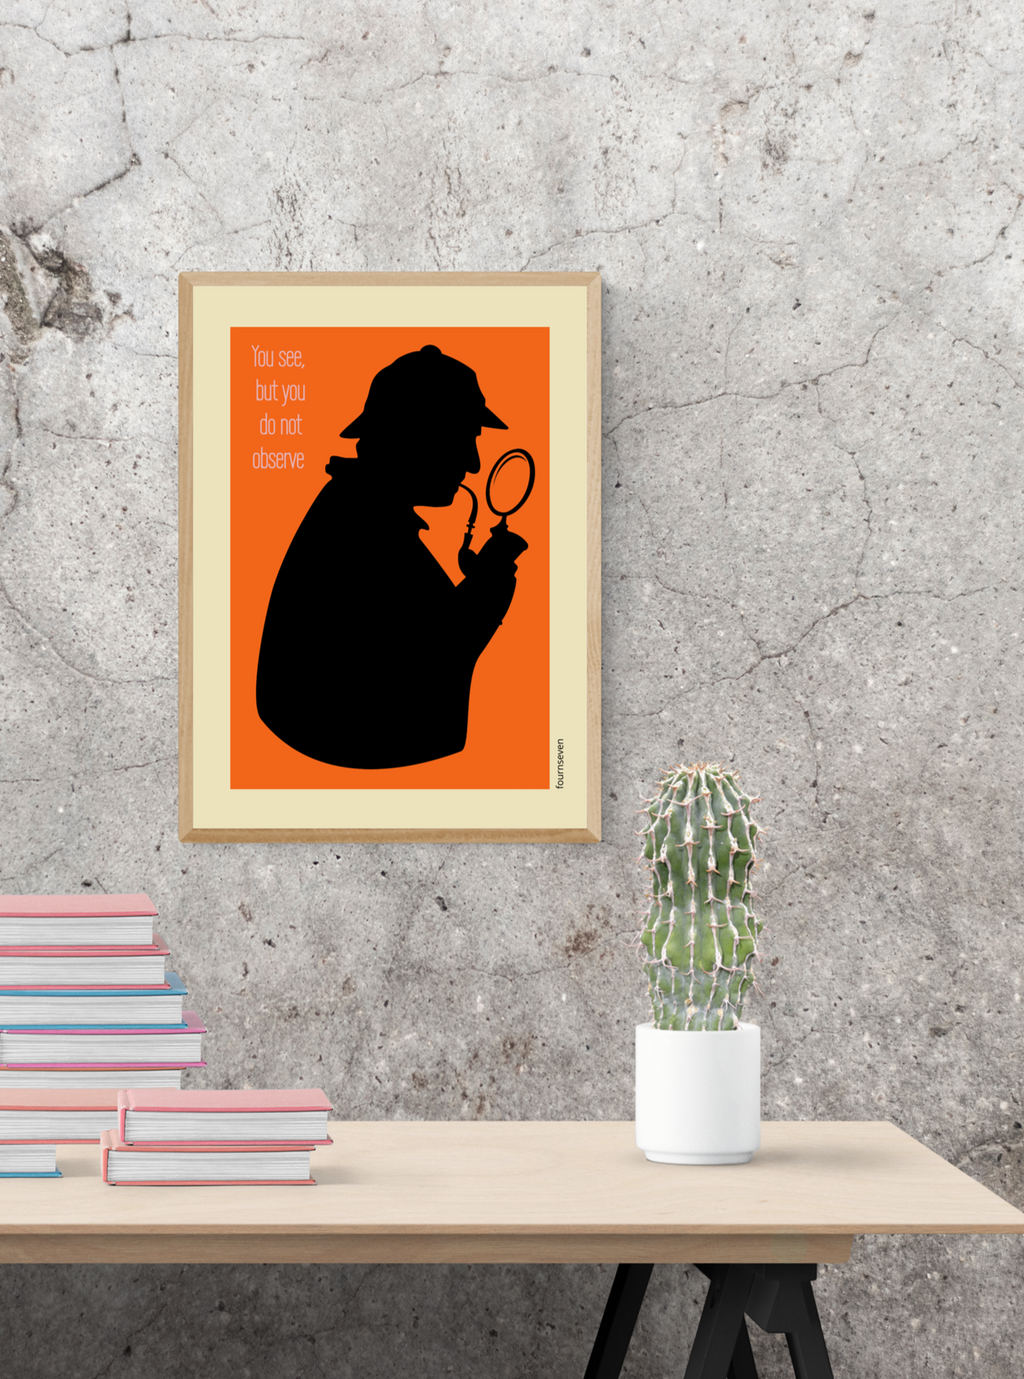 YOU SEE, BUT DO NOT OBSERVE. Sherlock Holmes poster.